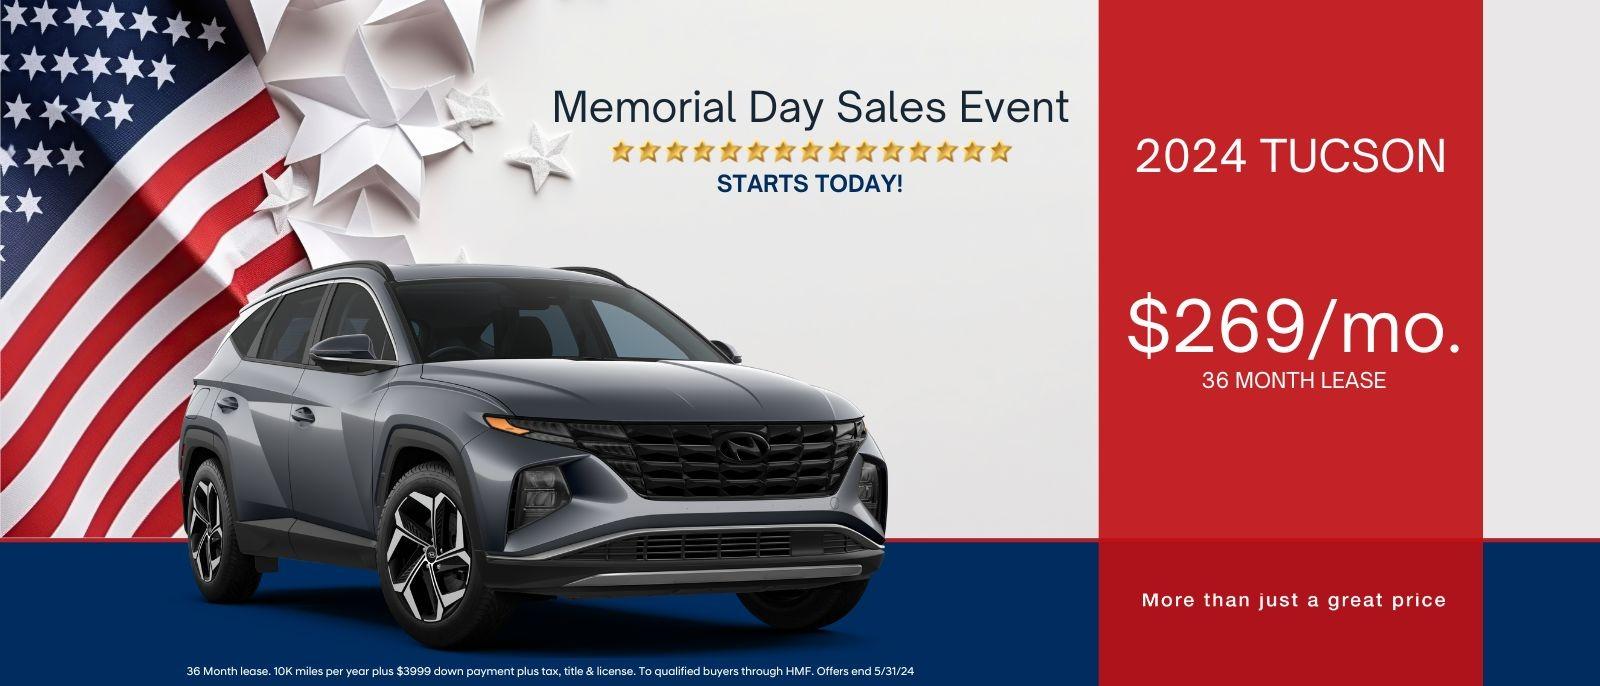 Memorial Day Sales Event Starts Today!

2024 Tucson 
$269/mo 36 month lease 
More than just a great price